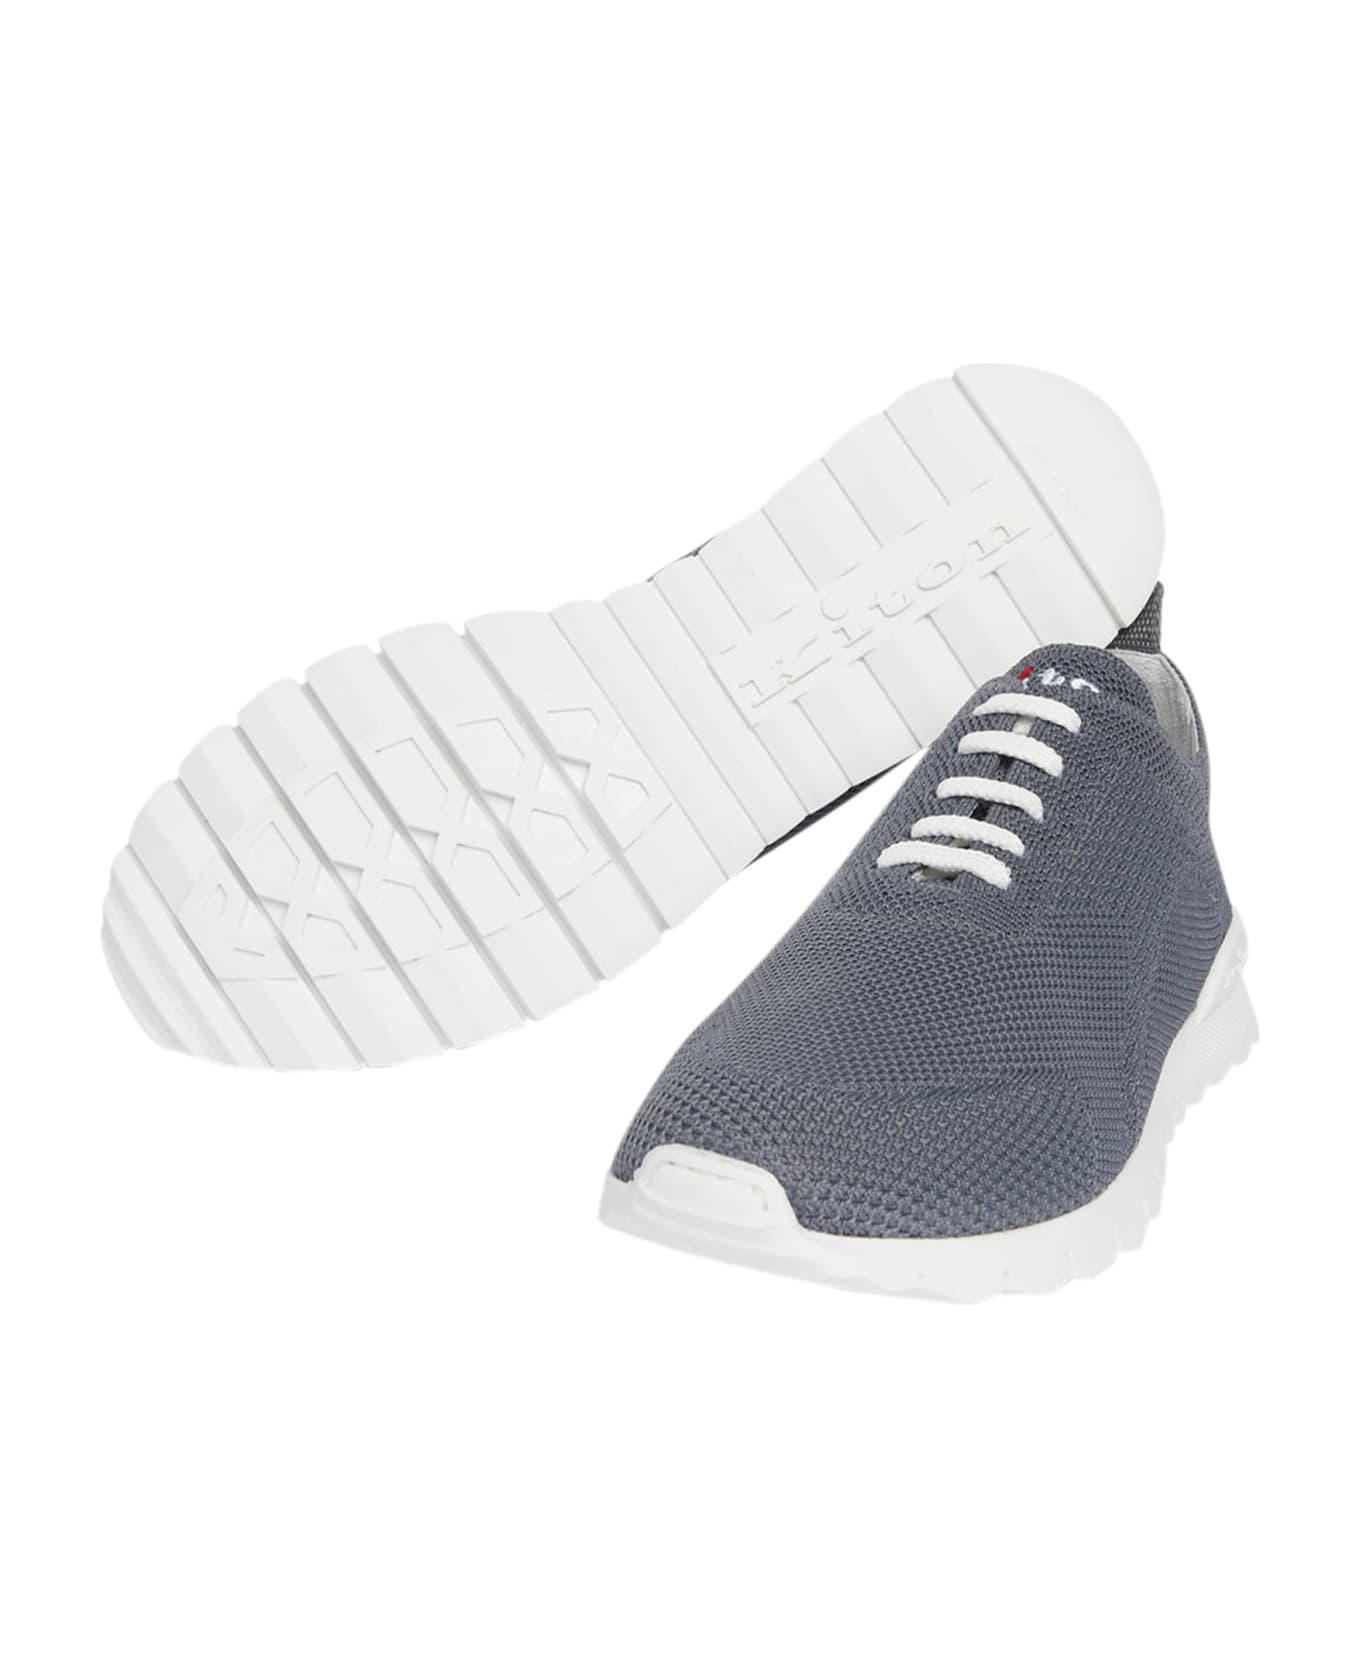 Kiton Fits - Sneakers Shoes Cotton - GREY スニーカー